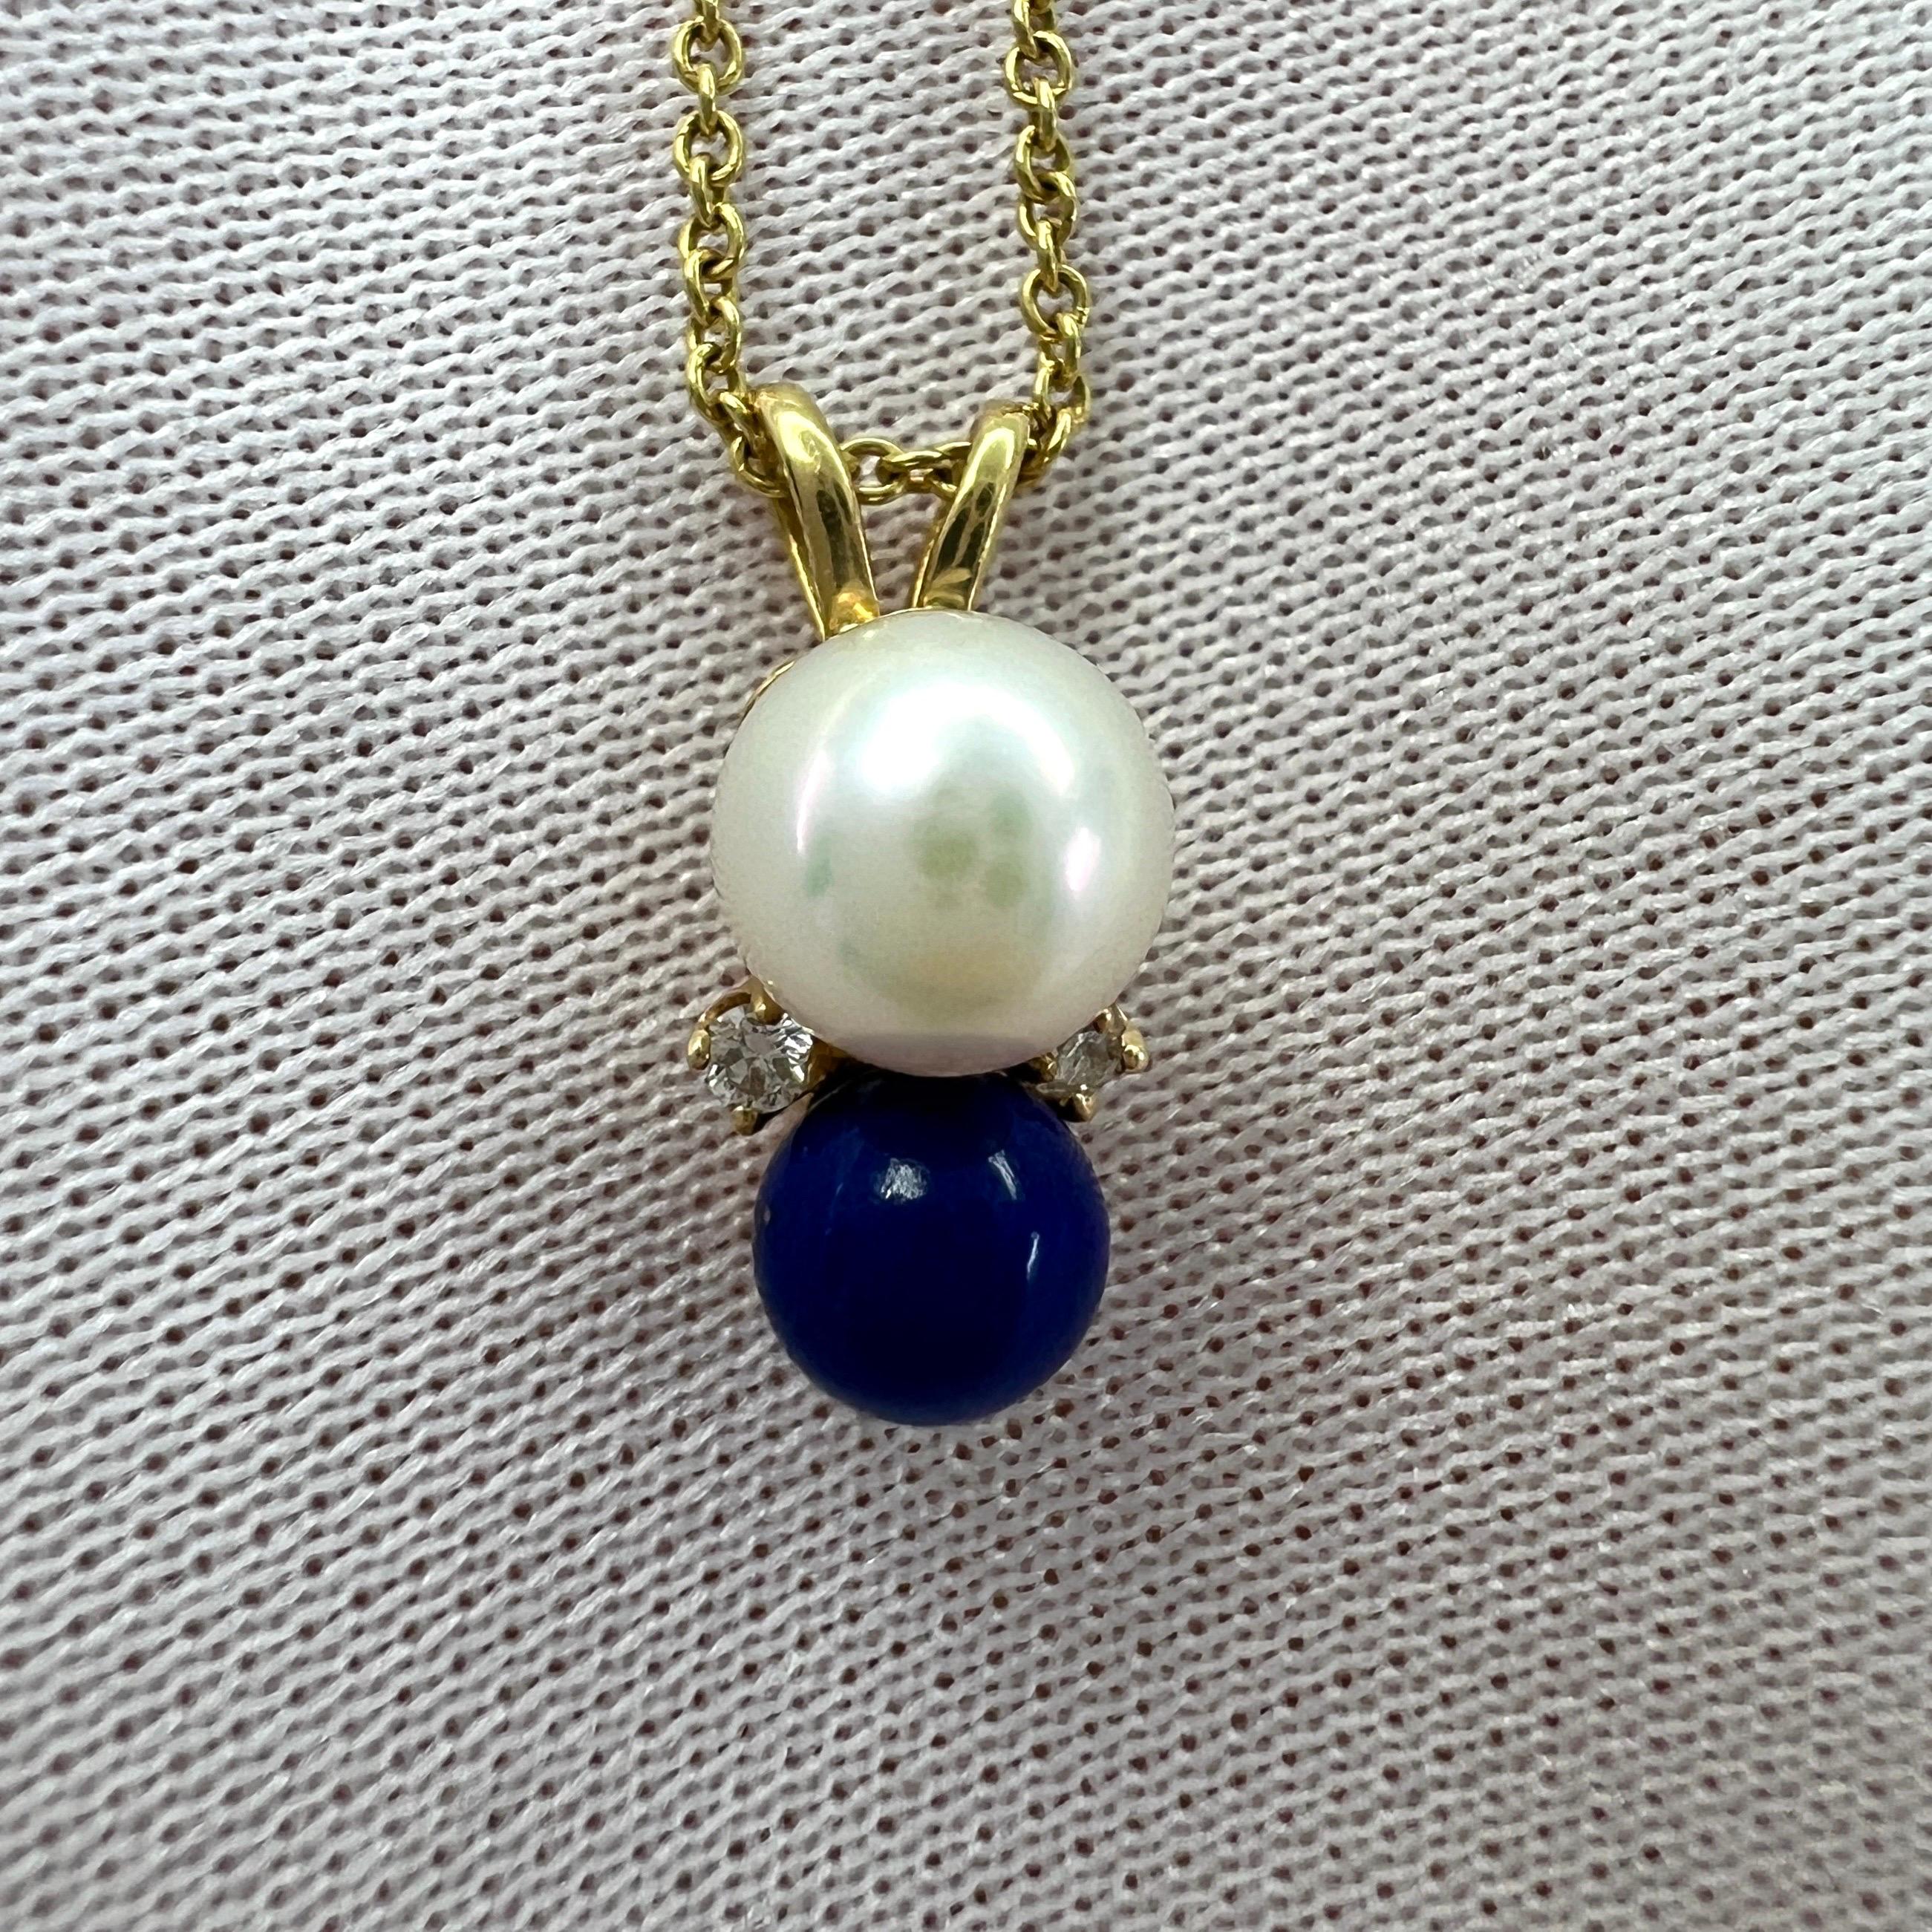 Vintage Tiffany & Co. Elsa Peretti White Pearl, Lapis Lazuli & Diamond 18k Yellow Gold Pendant Necklace.

Beautiful multi stone necklace from the renowned Elsa Peretti collection.
This pendant necklace features a 6.5mm white cultured pearl and a 5mm